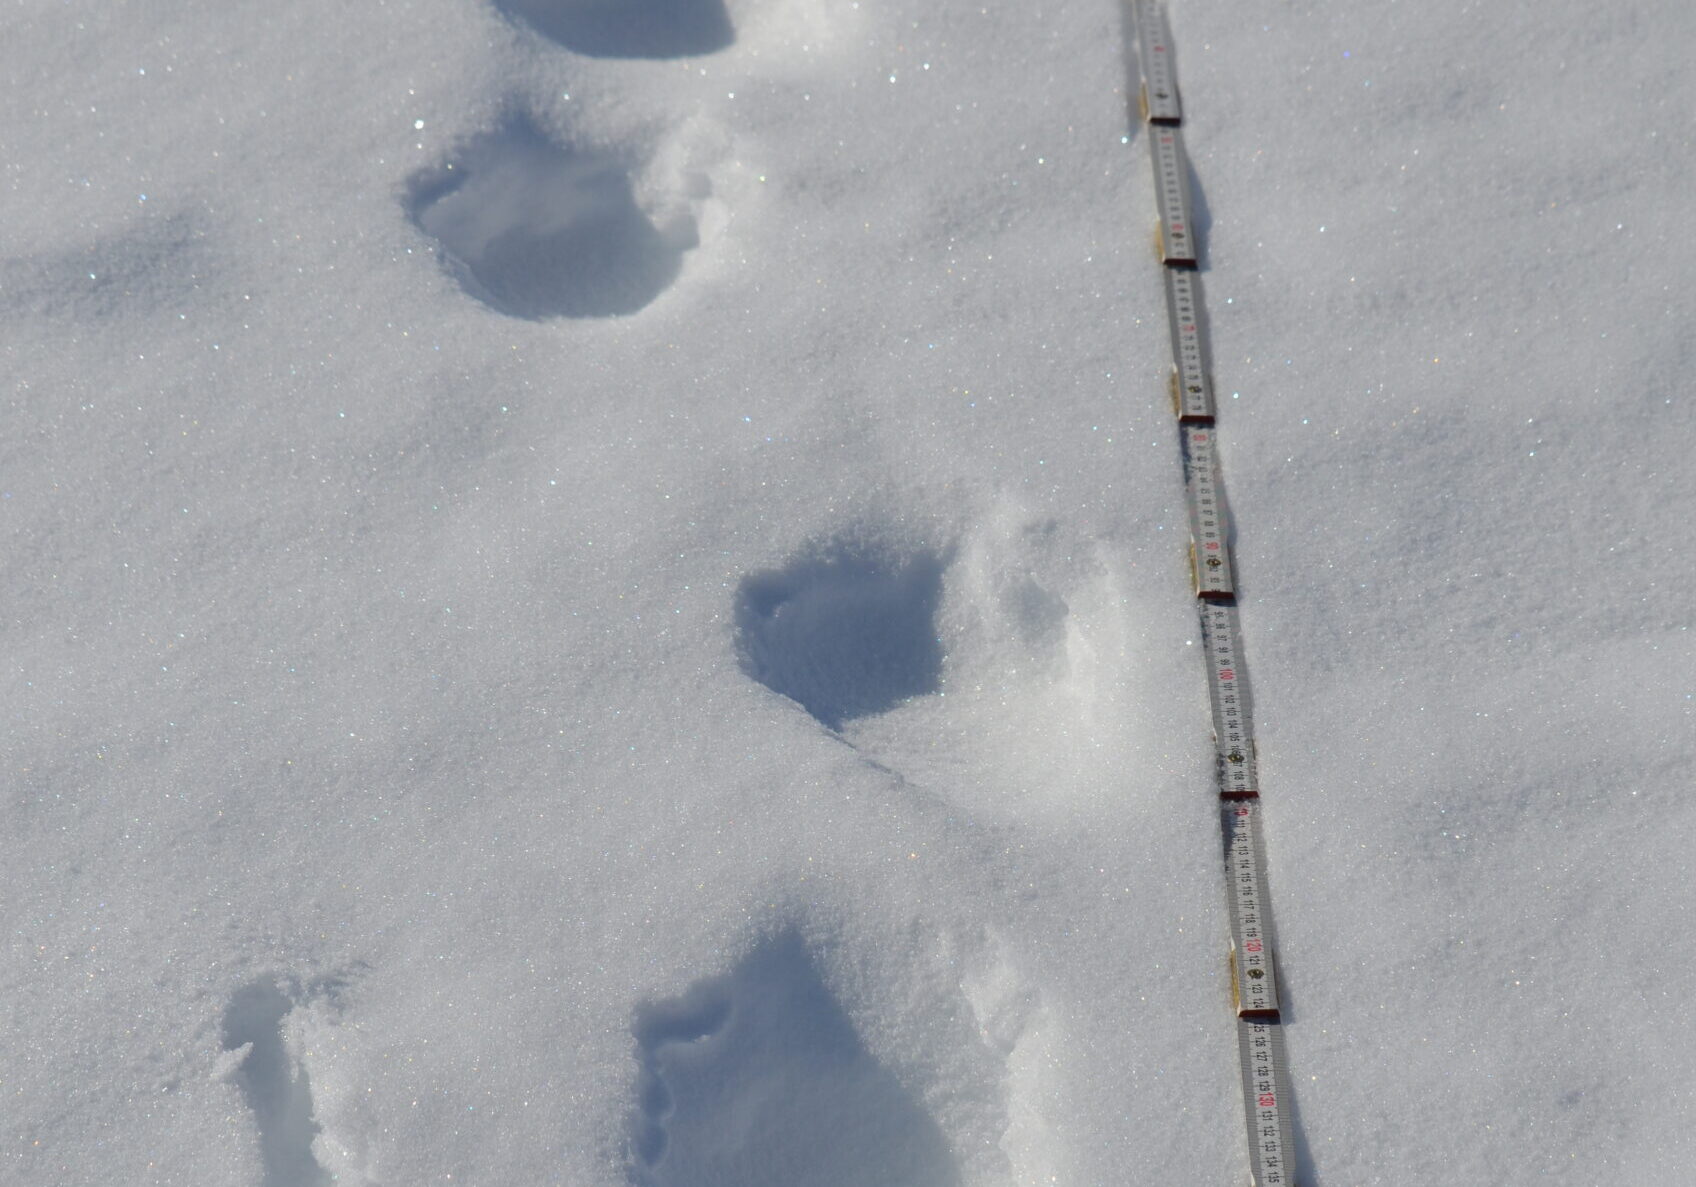 Wolverine tracks in the snow with a measuring tape positioned beside the tracks.